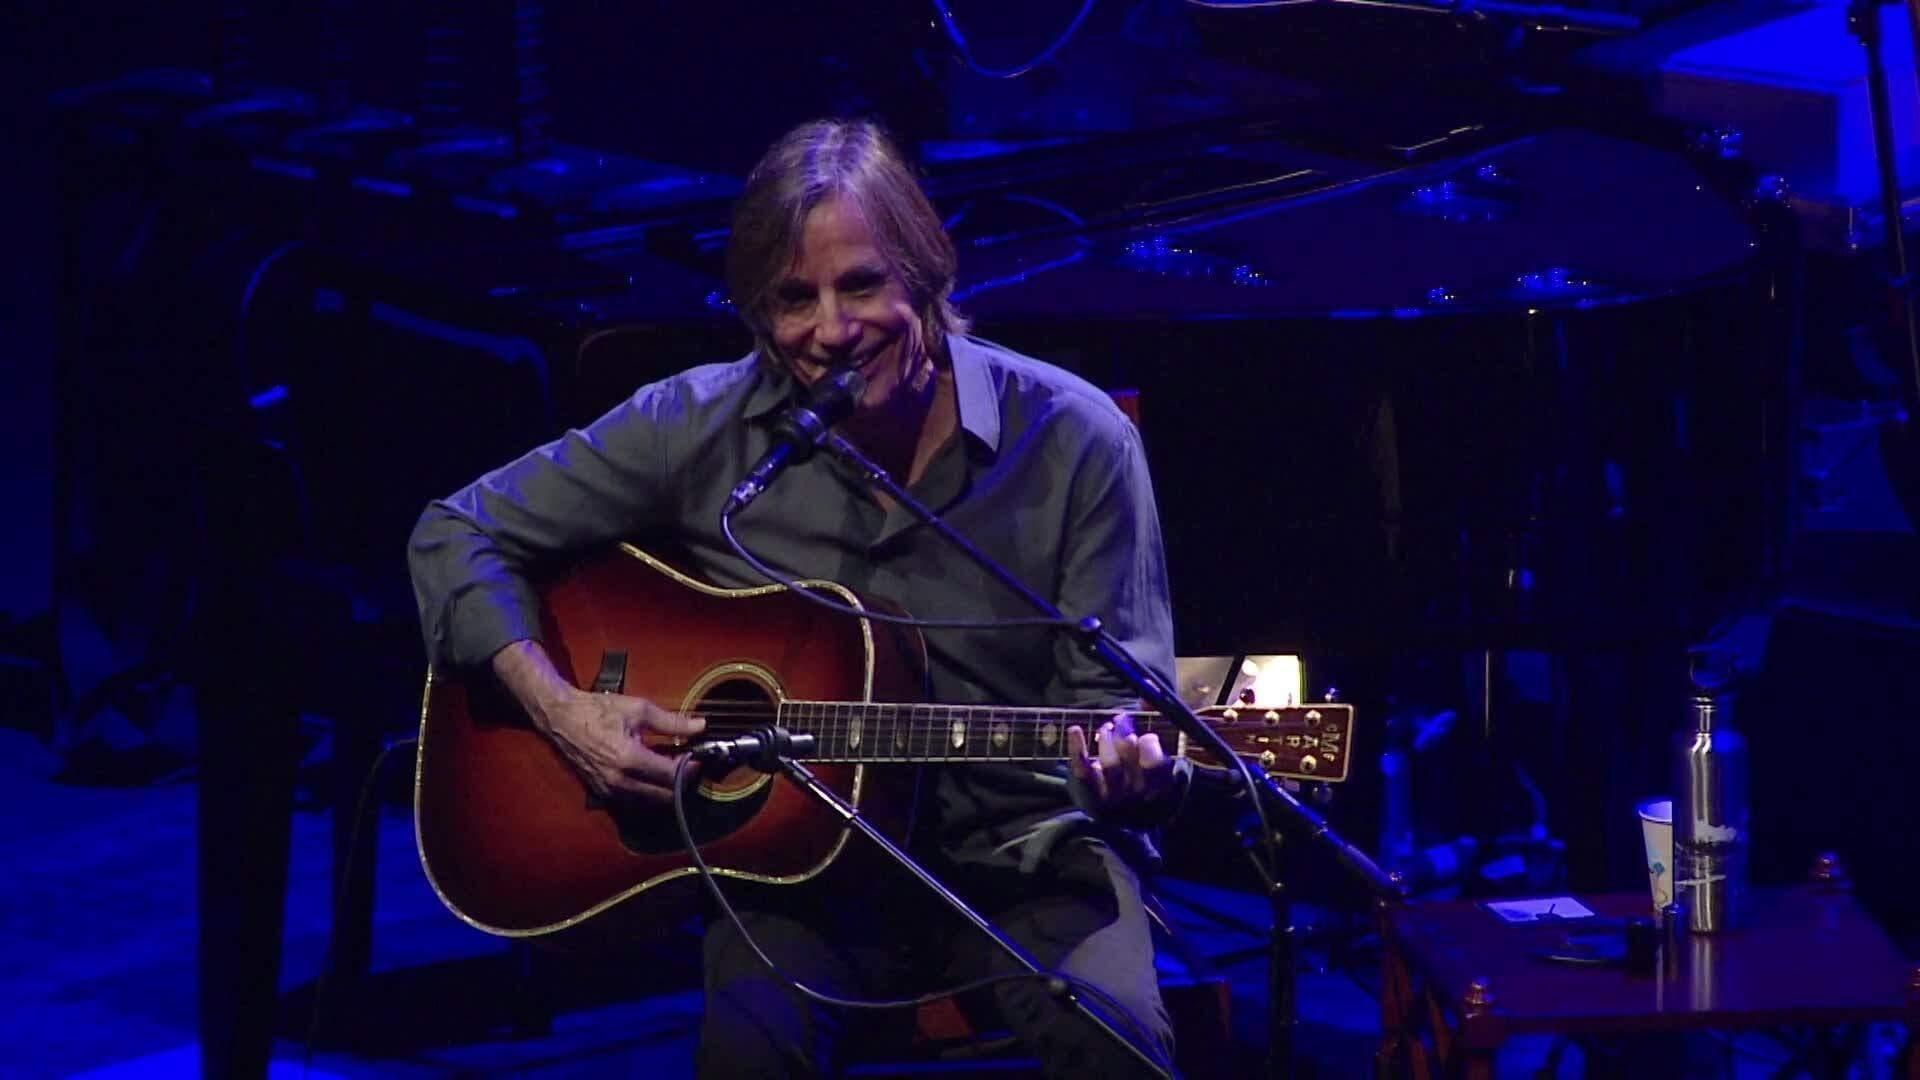 Jackson Browne: I'll Do Anything - Live In Concert backdrop